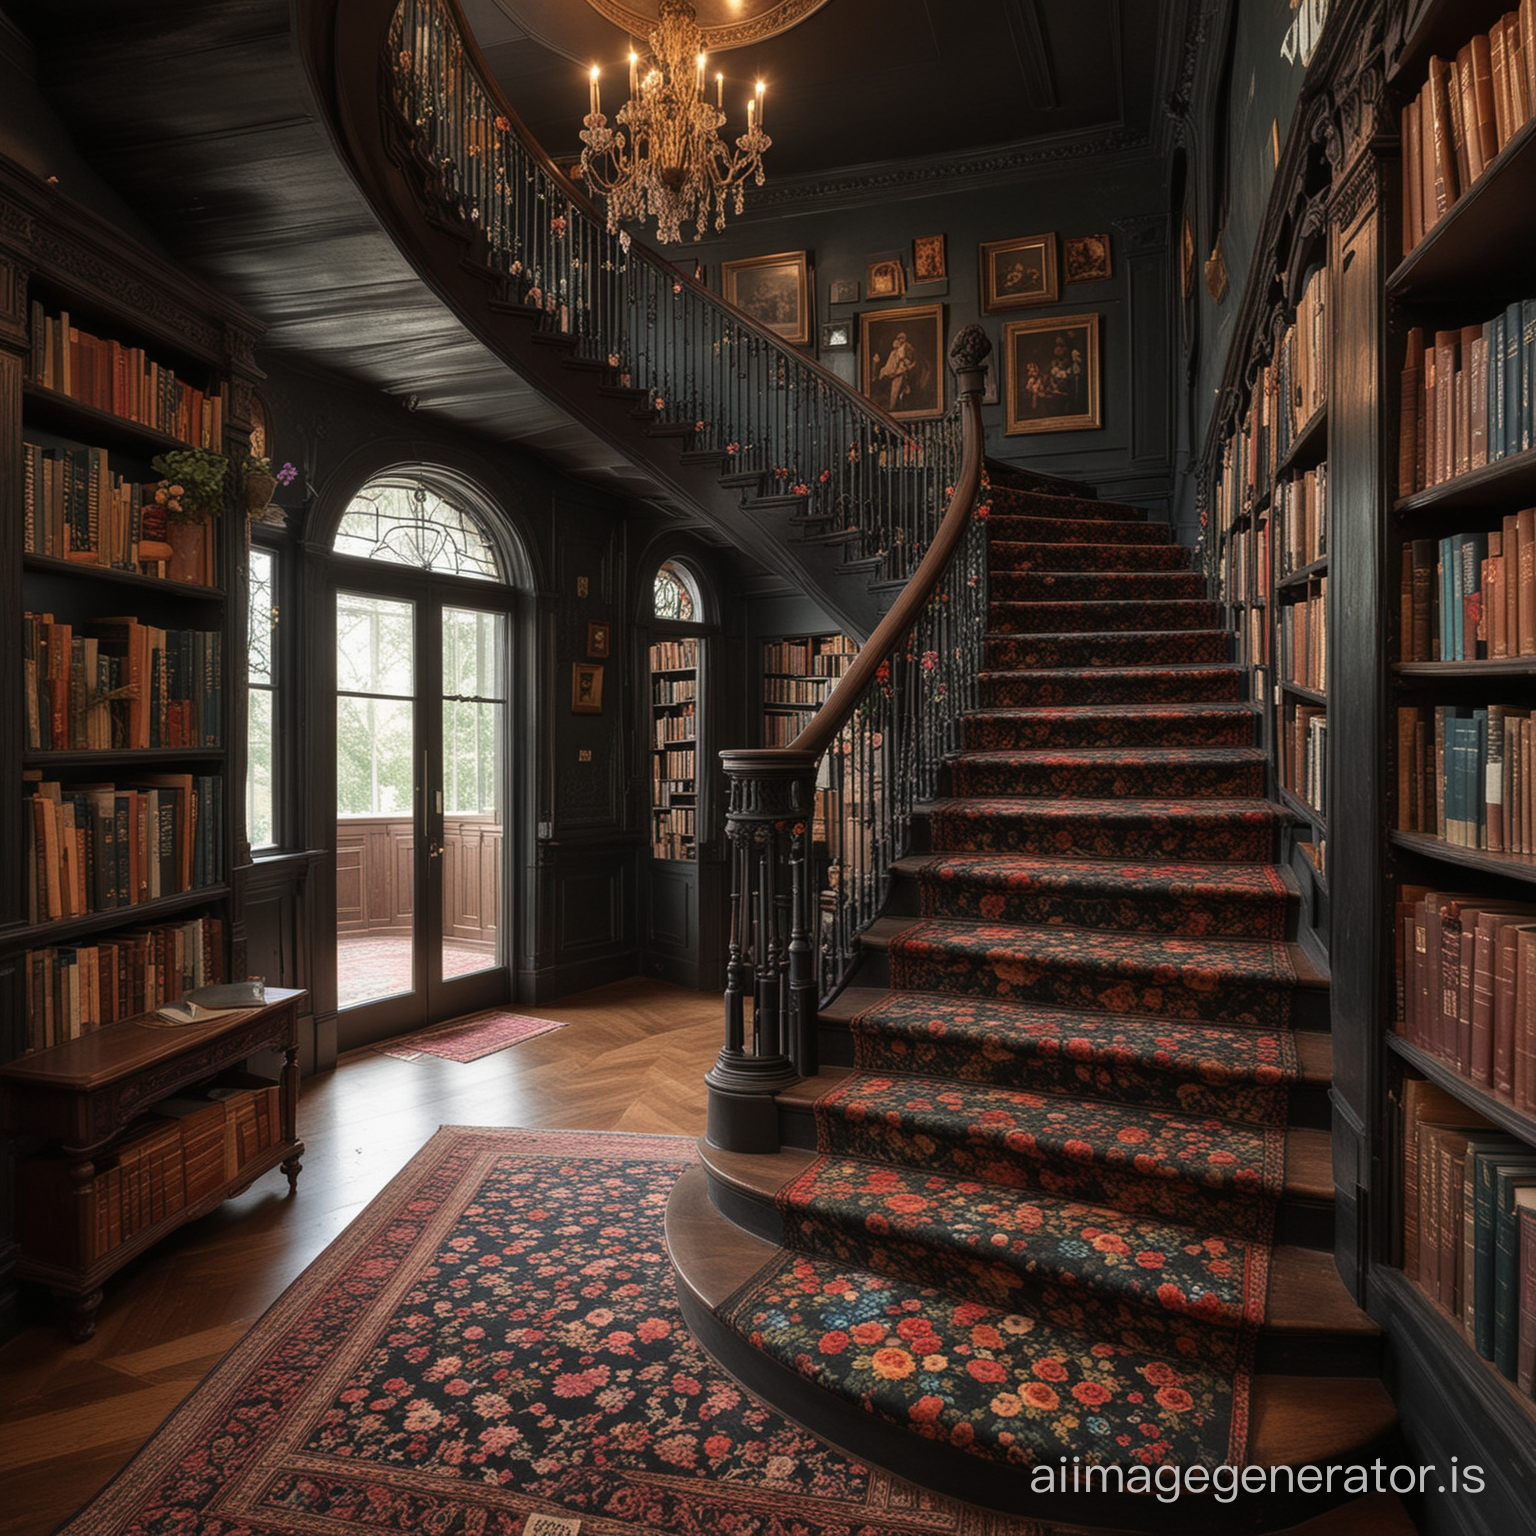 victorian style library with a staircase that has color full flowers all over staircase dark like in a dream with no pot and make the staircase go in a circle going down with a all of color but the stair going to the left with no carpet on the stair